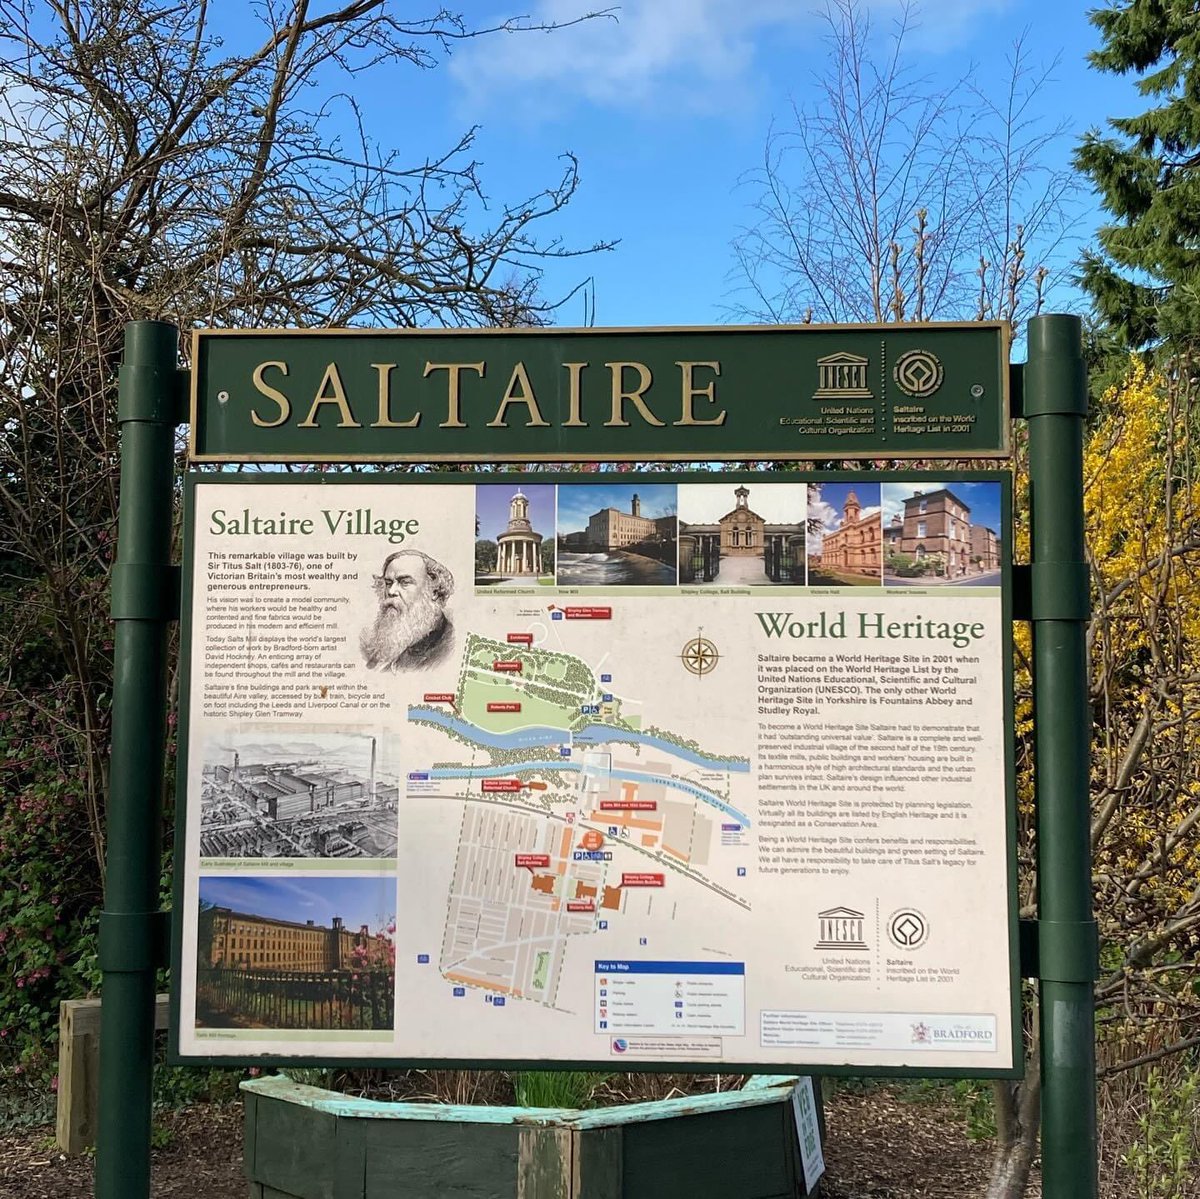 I popped down to #Saltaire on the train 😊 Named after Titus Salt, it’s a former mill town & #UNESCOWorldHeritageSite It has many beautiful listed buildings, a lovely park, the UK’s oldest working cable tramway & some lovely canal walks (or you can take a trip in a narrowboat) ☺️